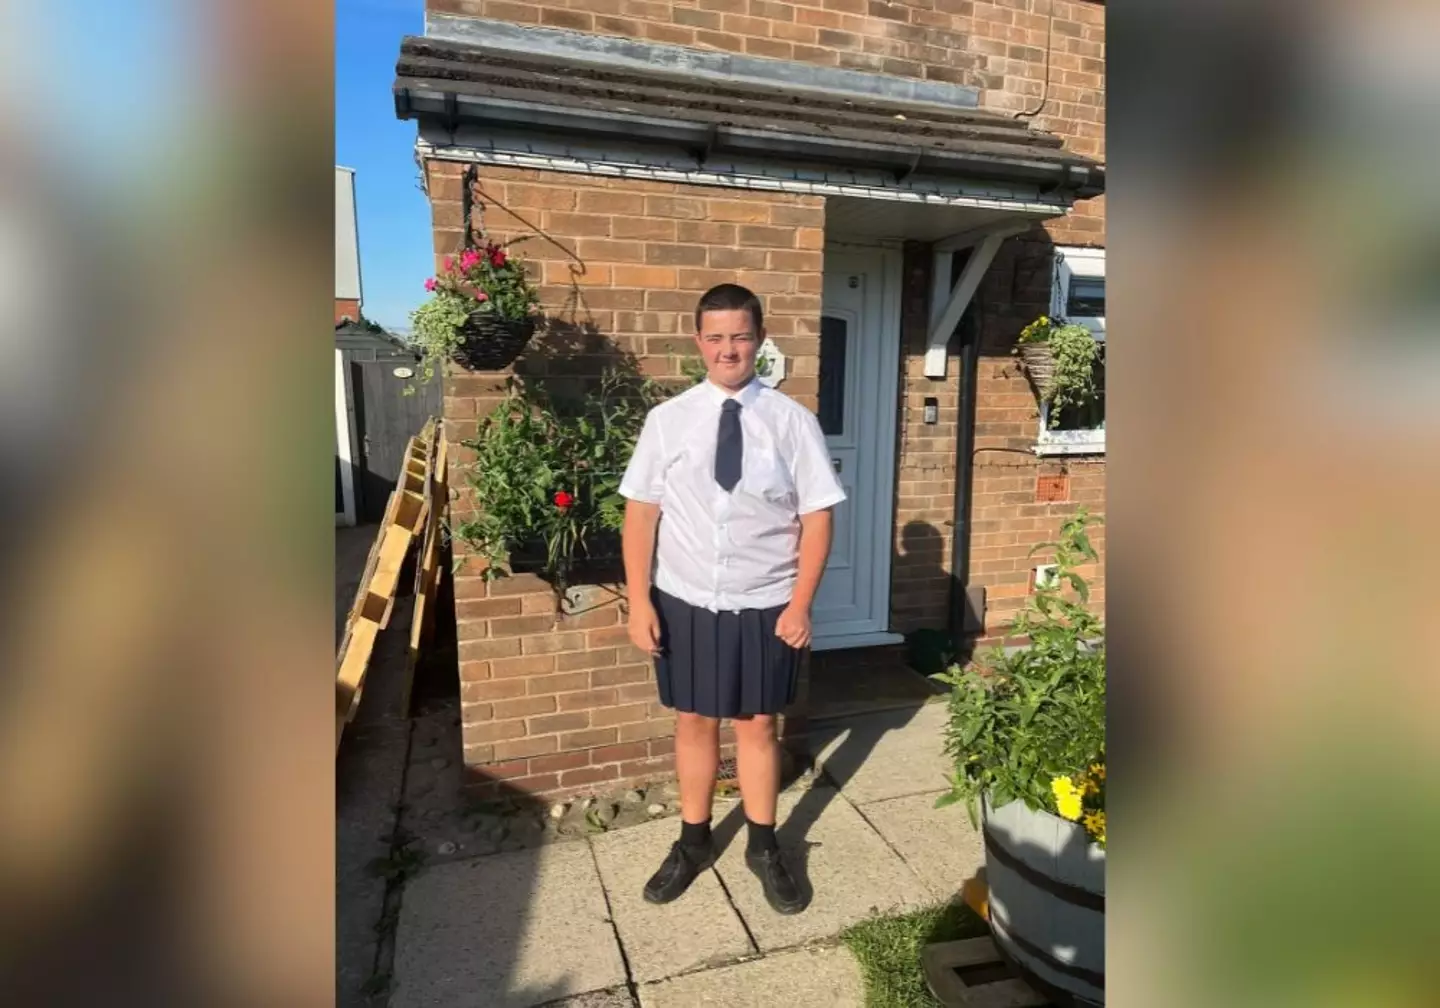 Thirteen-year-old Bodhi turned up for lessons in a skirt to beat the heat.